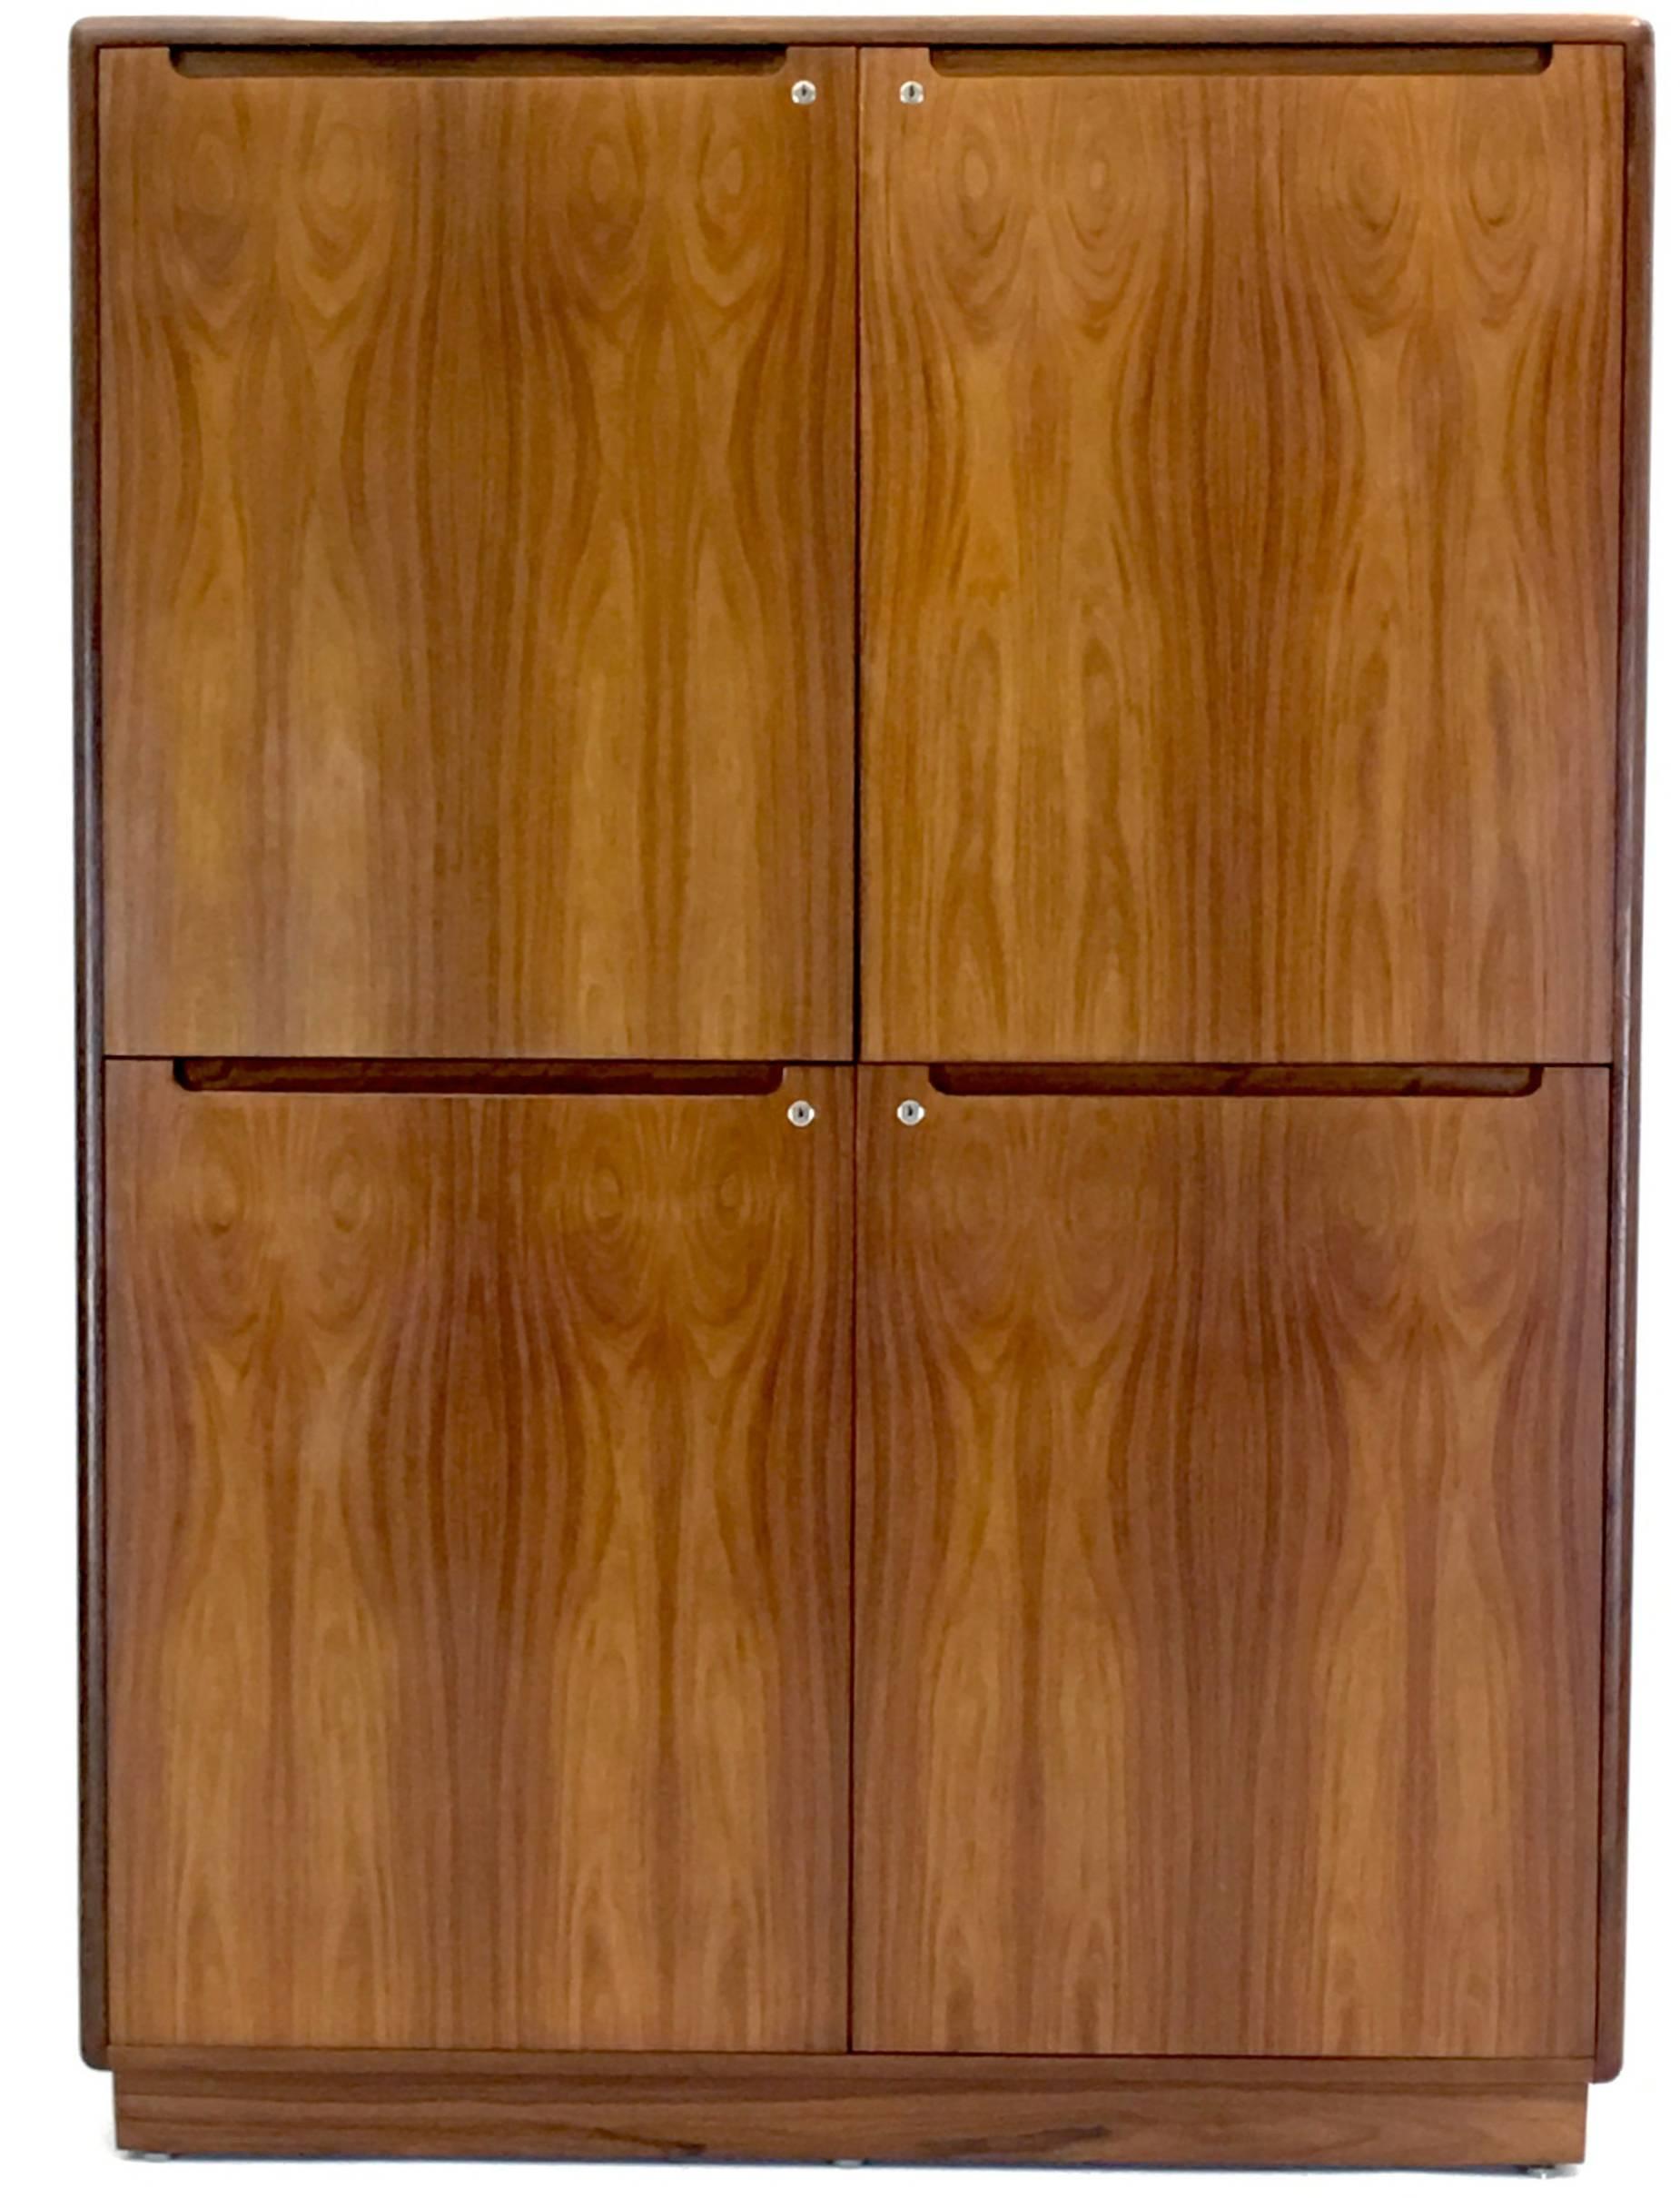 A true utilitarian cabinet by Nordisk Andels-Eksport produced in rosewood. Comes with central rosewood shelfs as well seven others that are totally adjustable in height with dozens of positions. Top doors, bottom doors or all doors can be removed